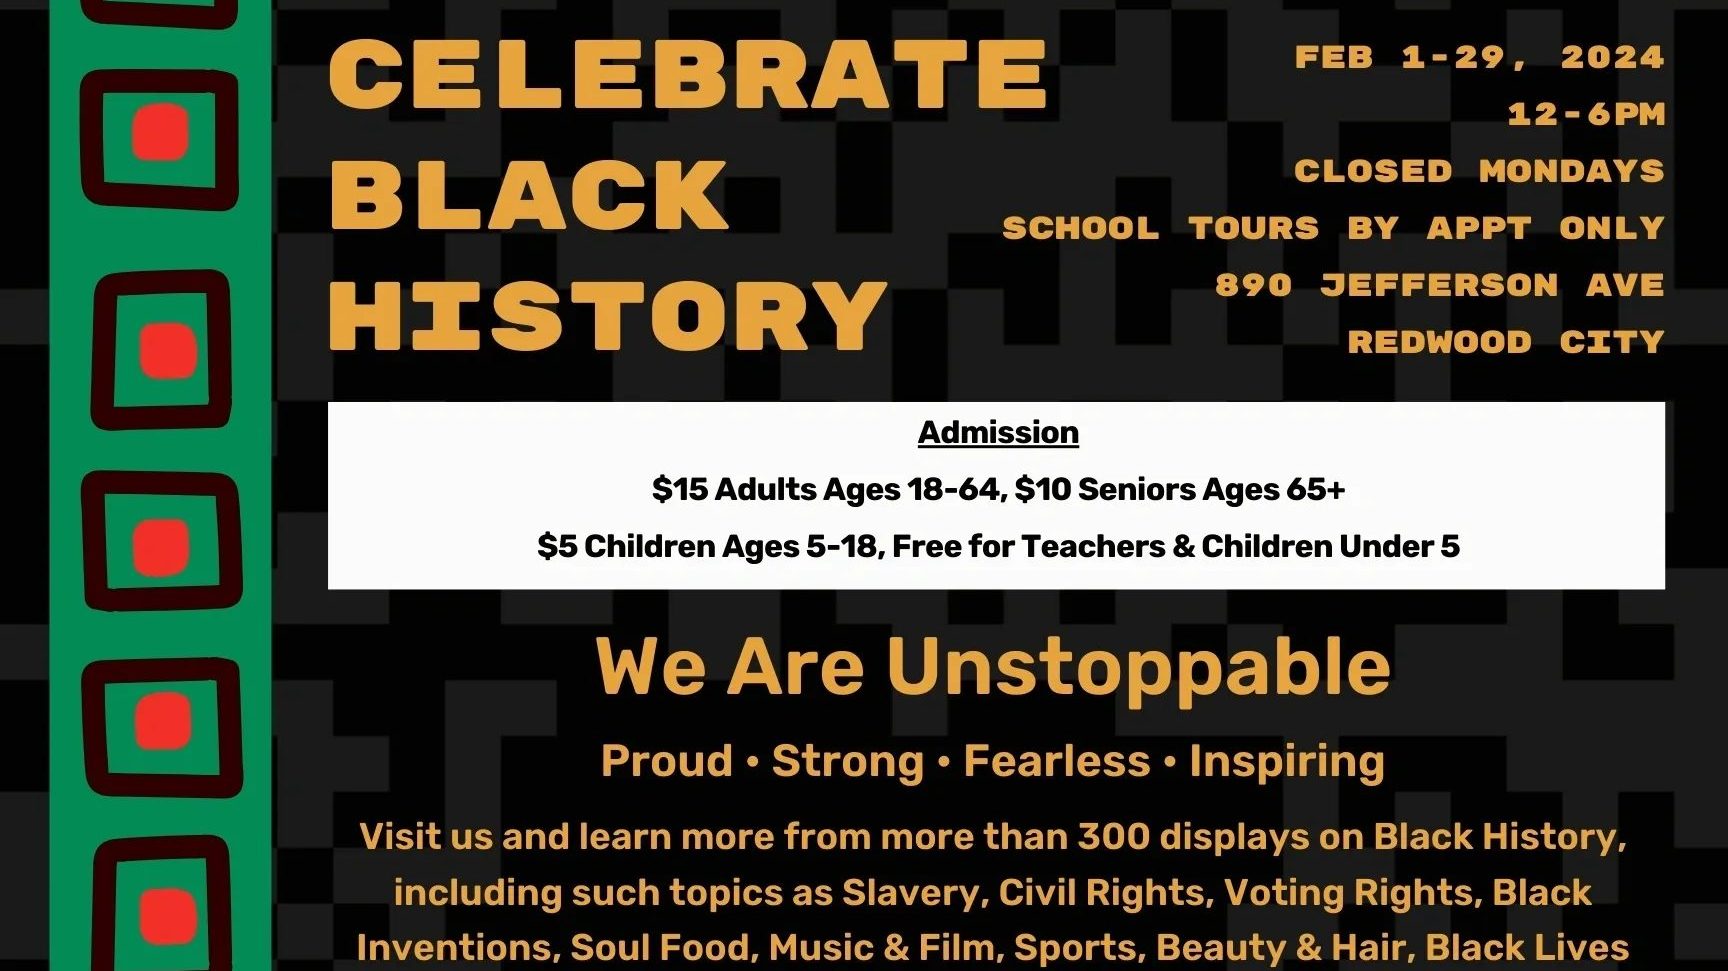 Black History Month with the Domini Hoskins Black History Museum & Learning Center